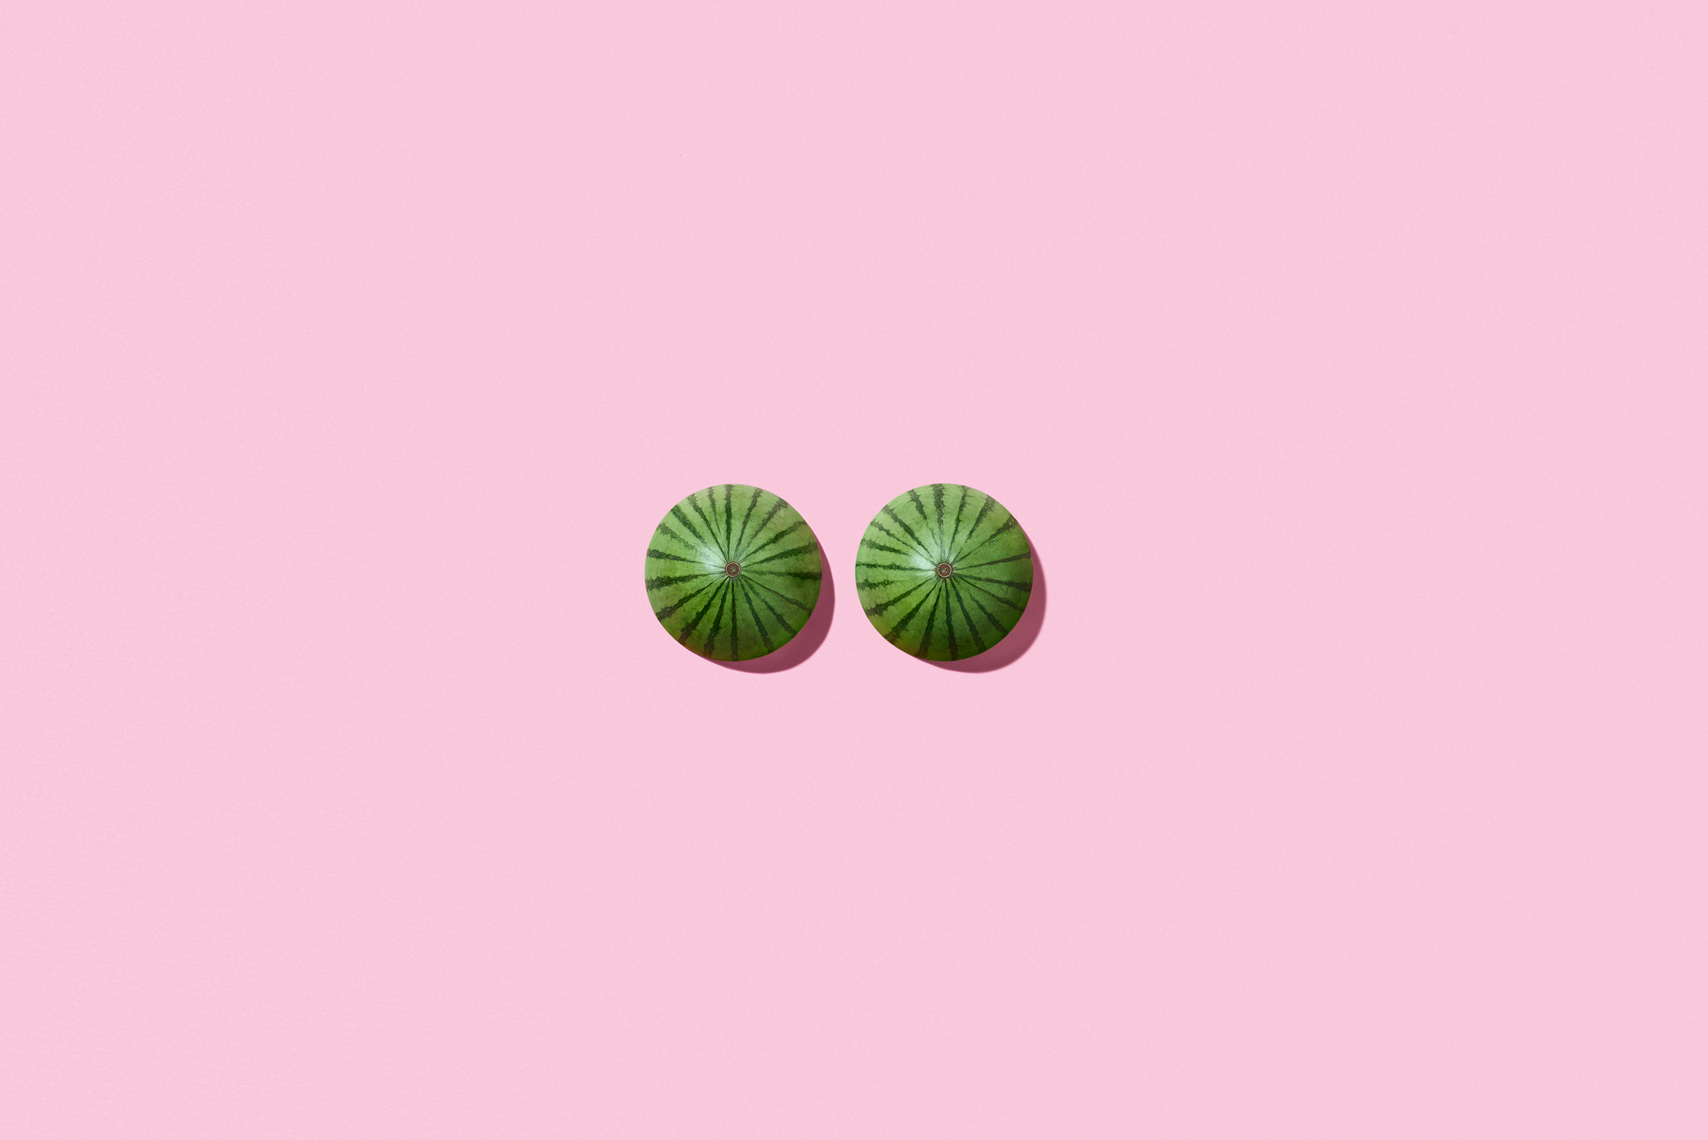 Melons 🍉🍉 // Conceptual Still Life Food Photography